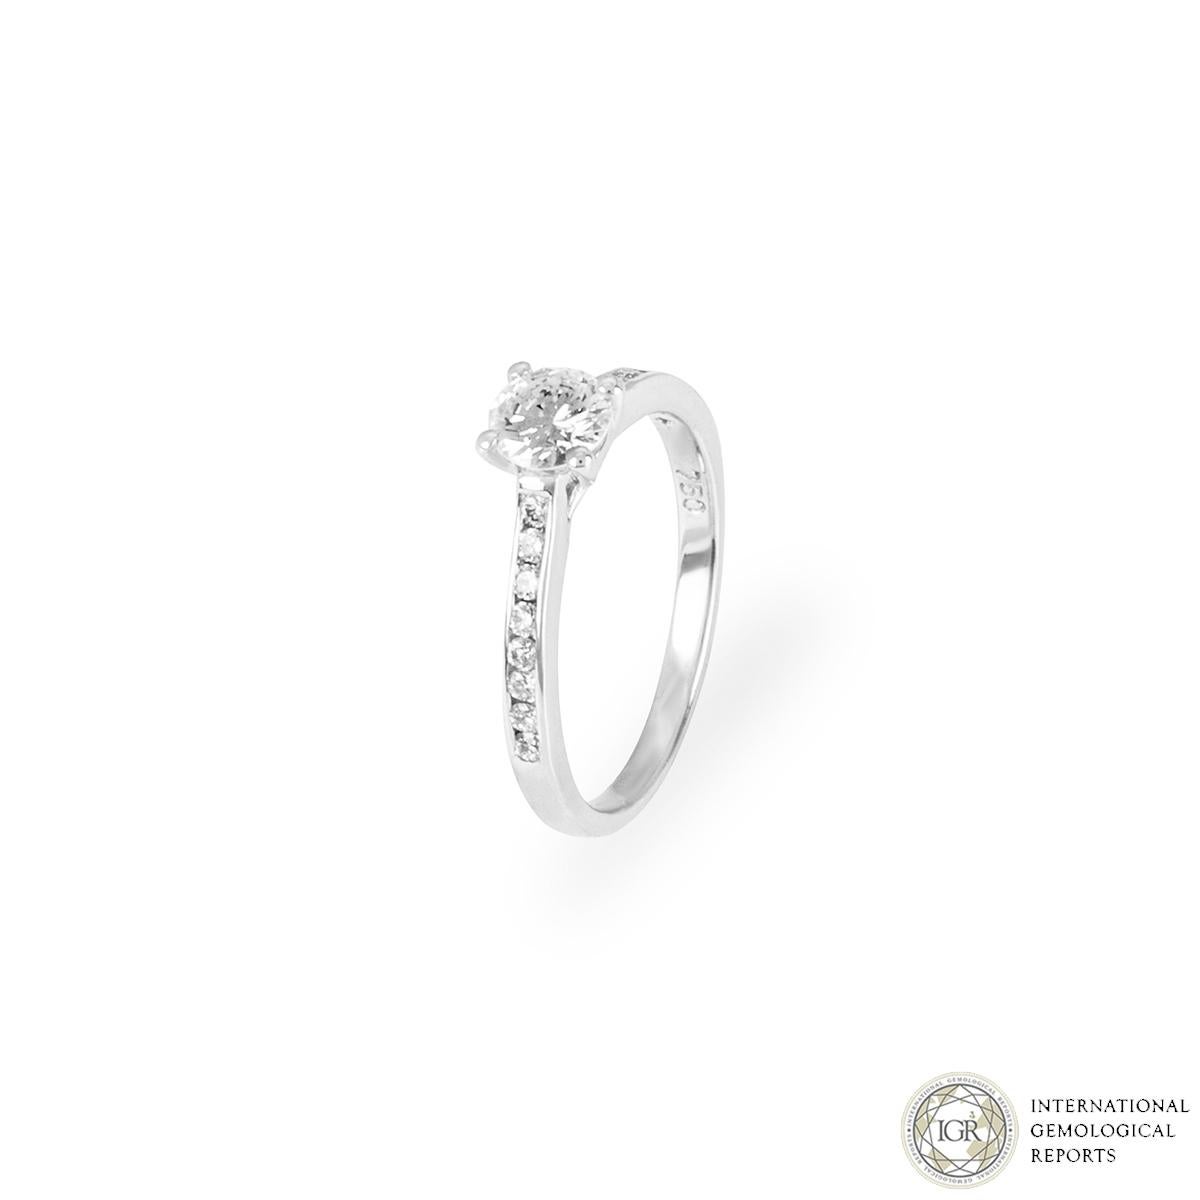 A beautiful 18k white gold diamond engagement ring. The engagement ring is set to the centre in a four claw mount with a round brilliant cut diamond weighing 0.52ct, D colour and VS1 clarity. The diamond is further complemented by 16 round brilliant